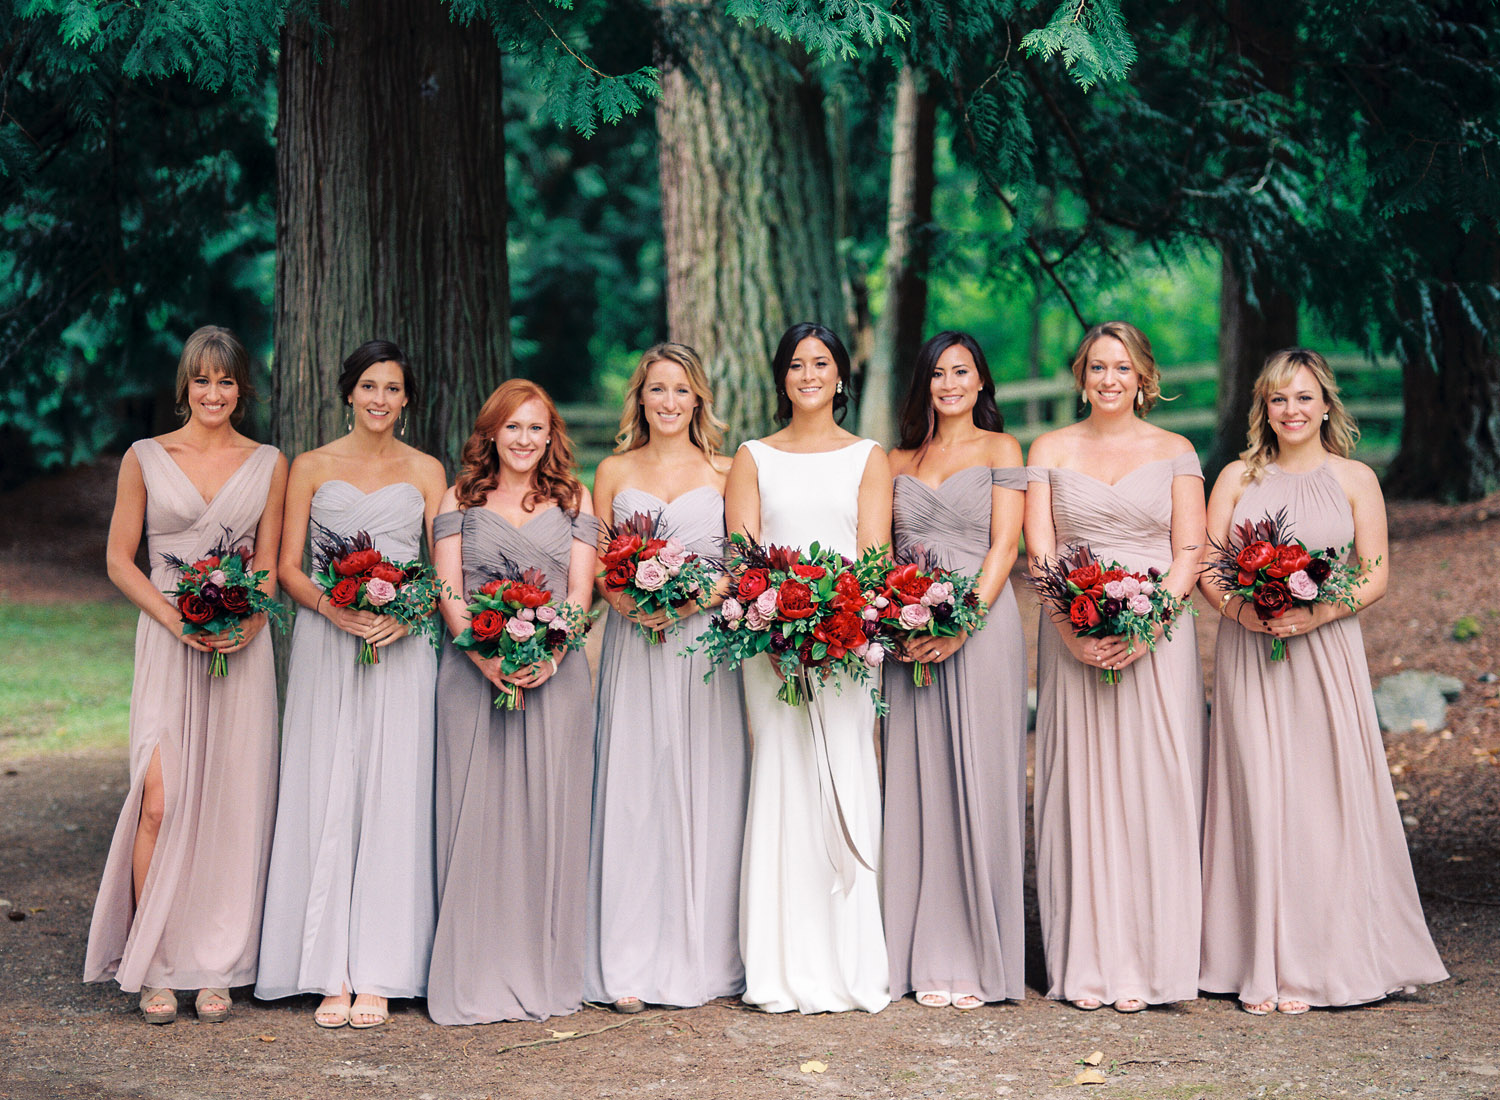 delille cellars blush colored bridal party wedding photography.jpg